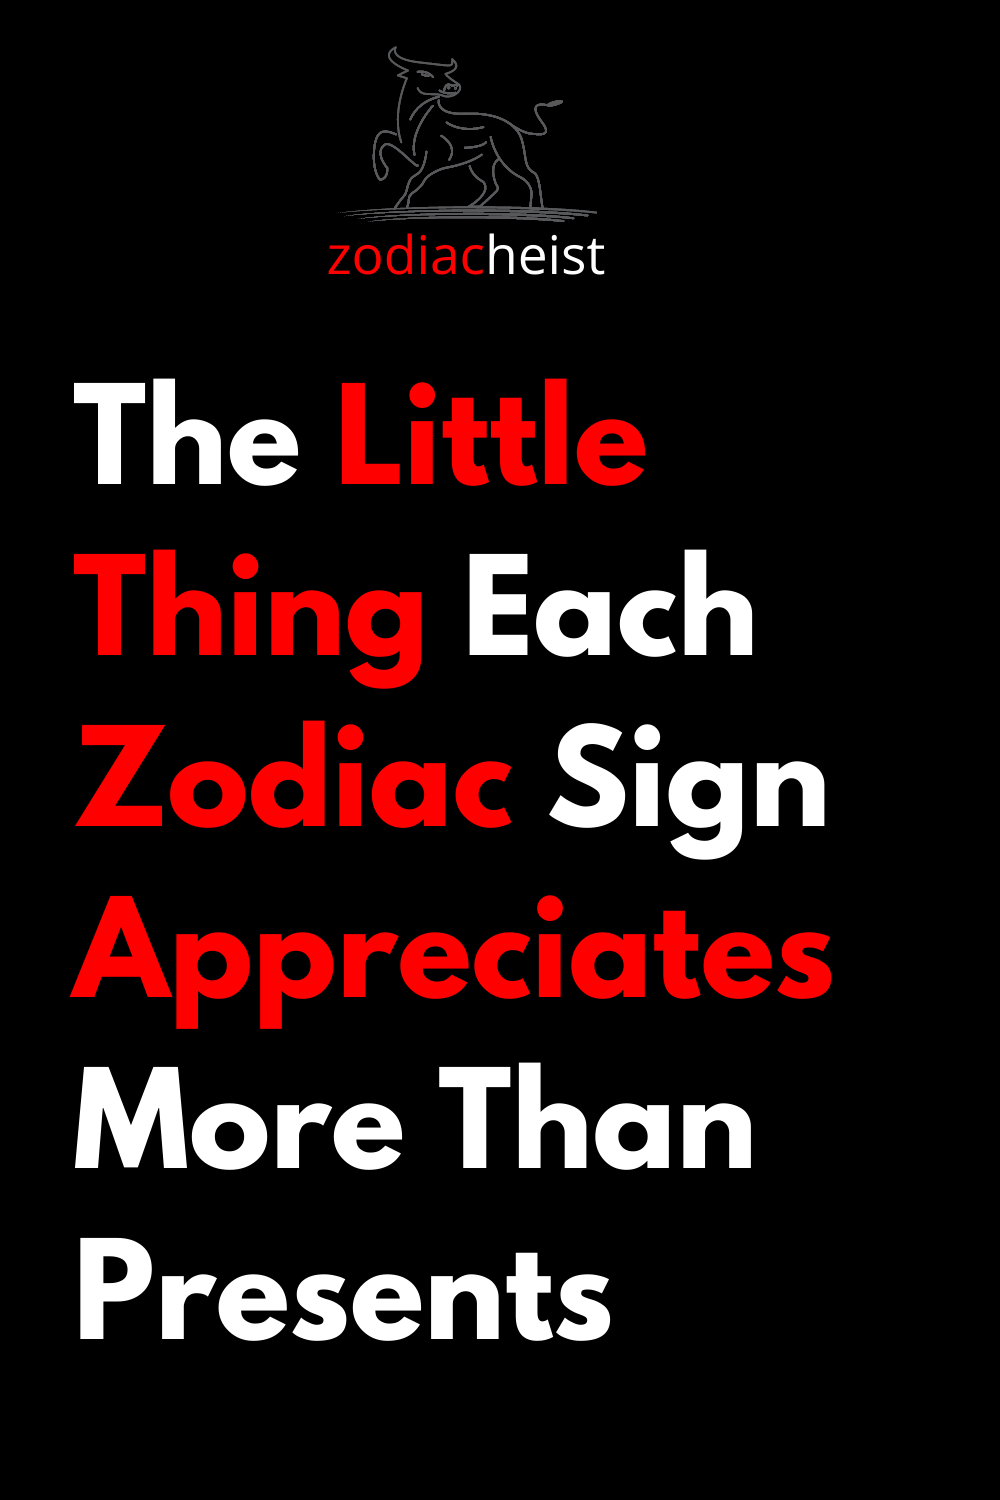 The Little Thing Each Zodiac Sign Appreciates More Than Presents